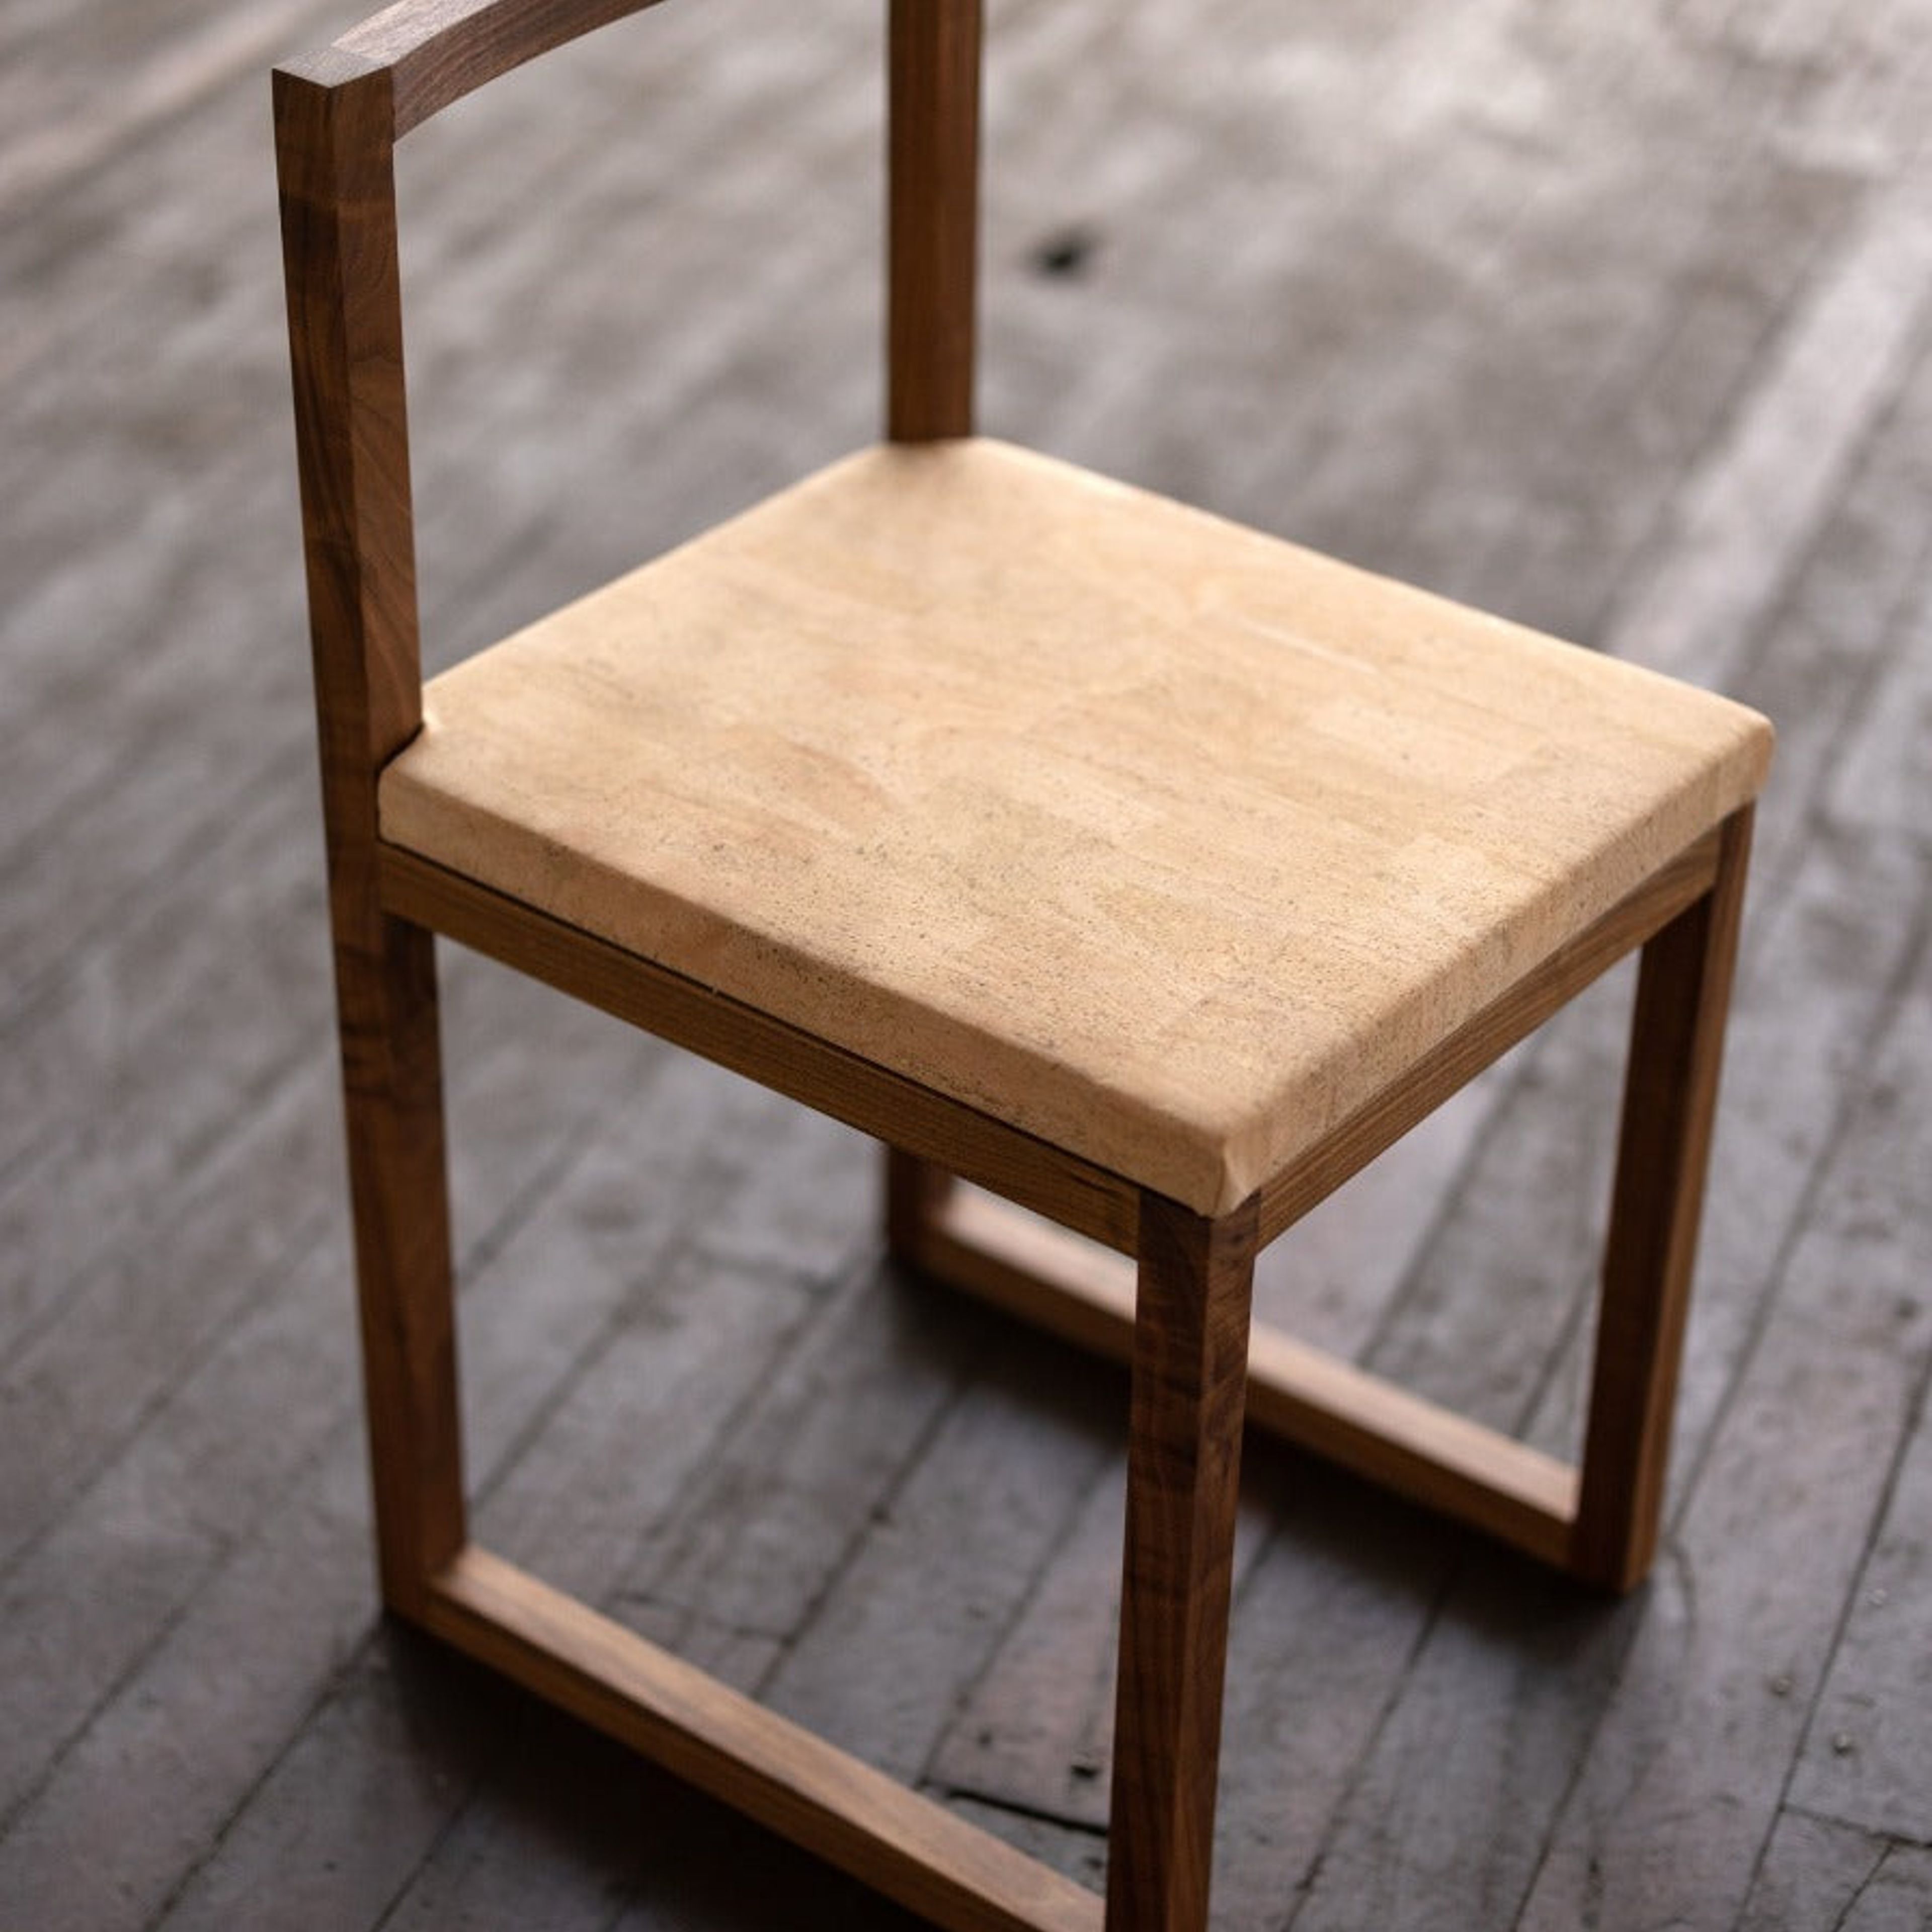 Wood and Cork Chair | Dining or Writing Desk Chair | Porto Chair